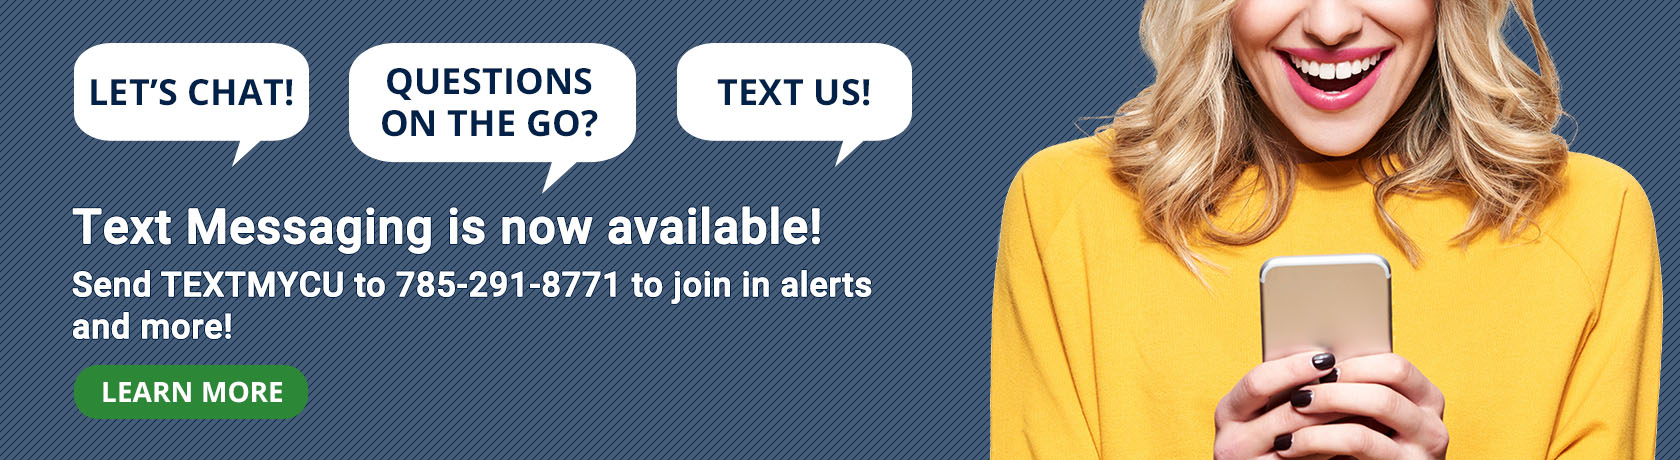 Text Messaging is Now Available.  Send TEXTMYCU to 785-291-8771 to join in alerts and more.  Learn More.